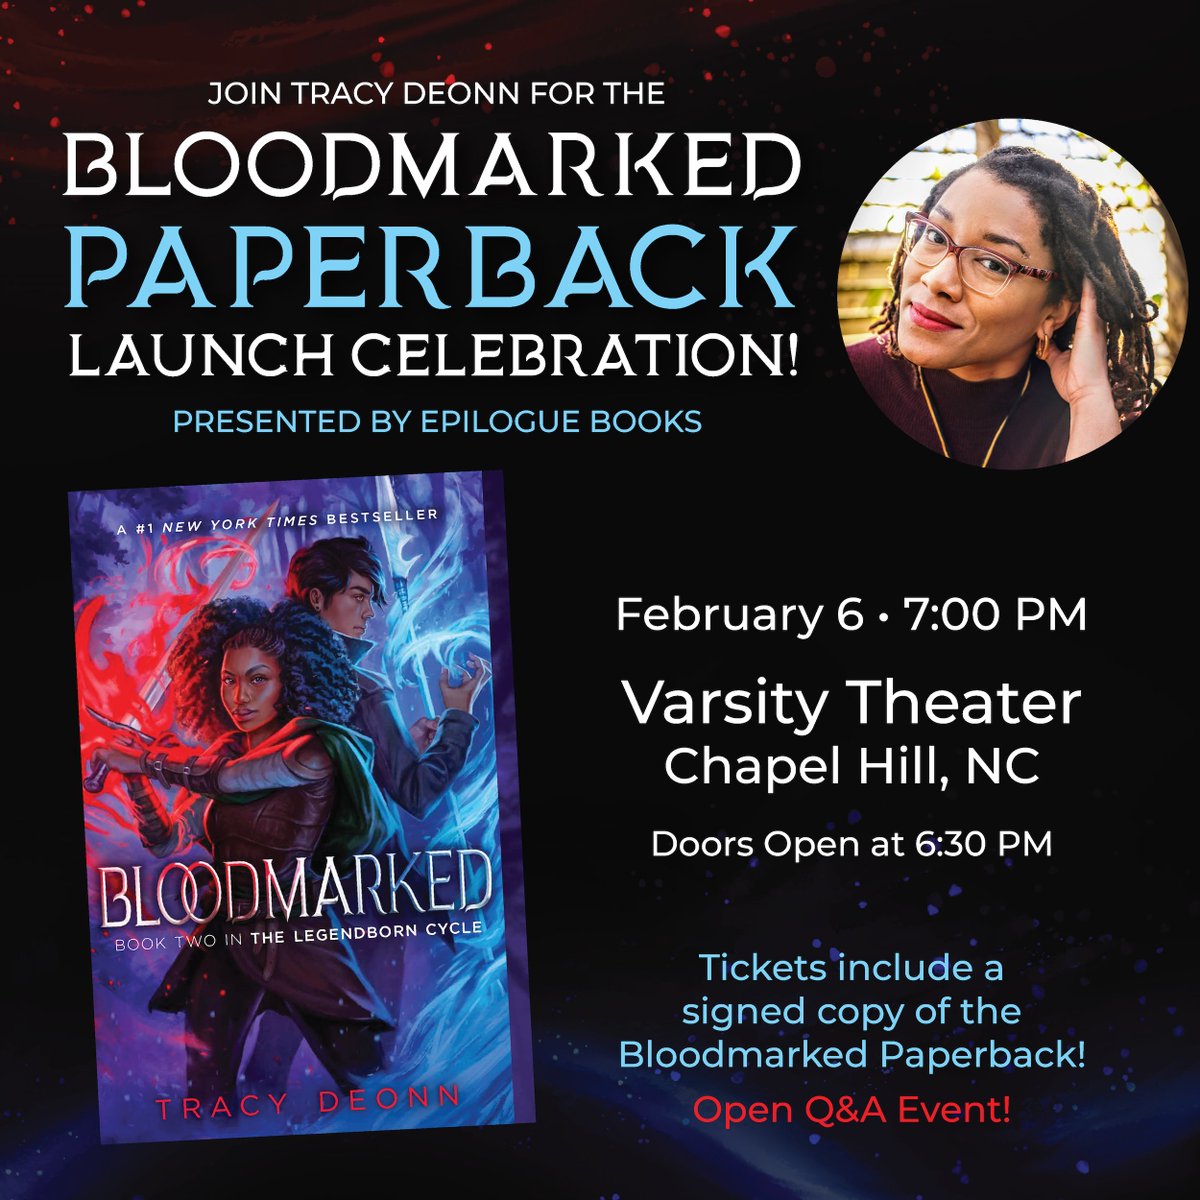 Join me for the Bloodmarked Paperback launch celebration! @epiloguebooksch is hosting me for an open Q&A! Bring yer burning questions!🤩 epiloguebookcafe.com/product/bloodm… ✨ Next Tuesday, Feb 6 ✨ 7 PM (Doors open 6:30 PM!) ✨ Varsity Theater, Chapel Hill, NC